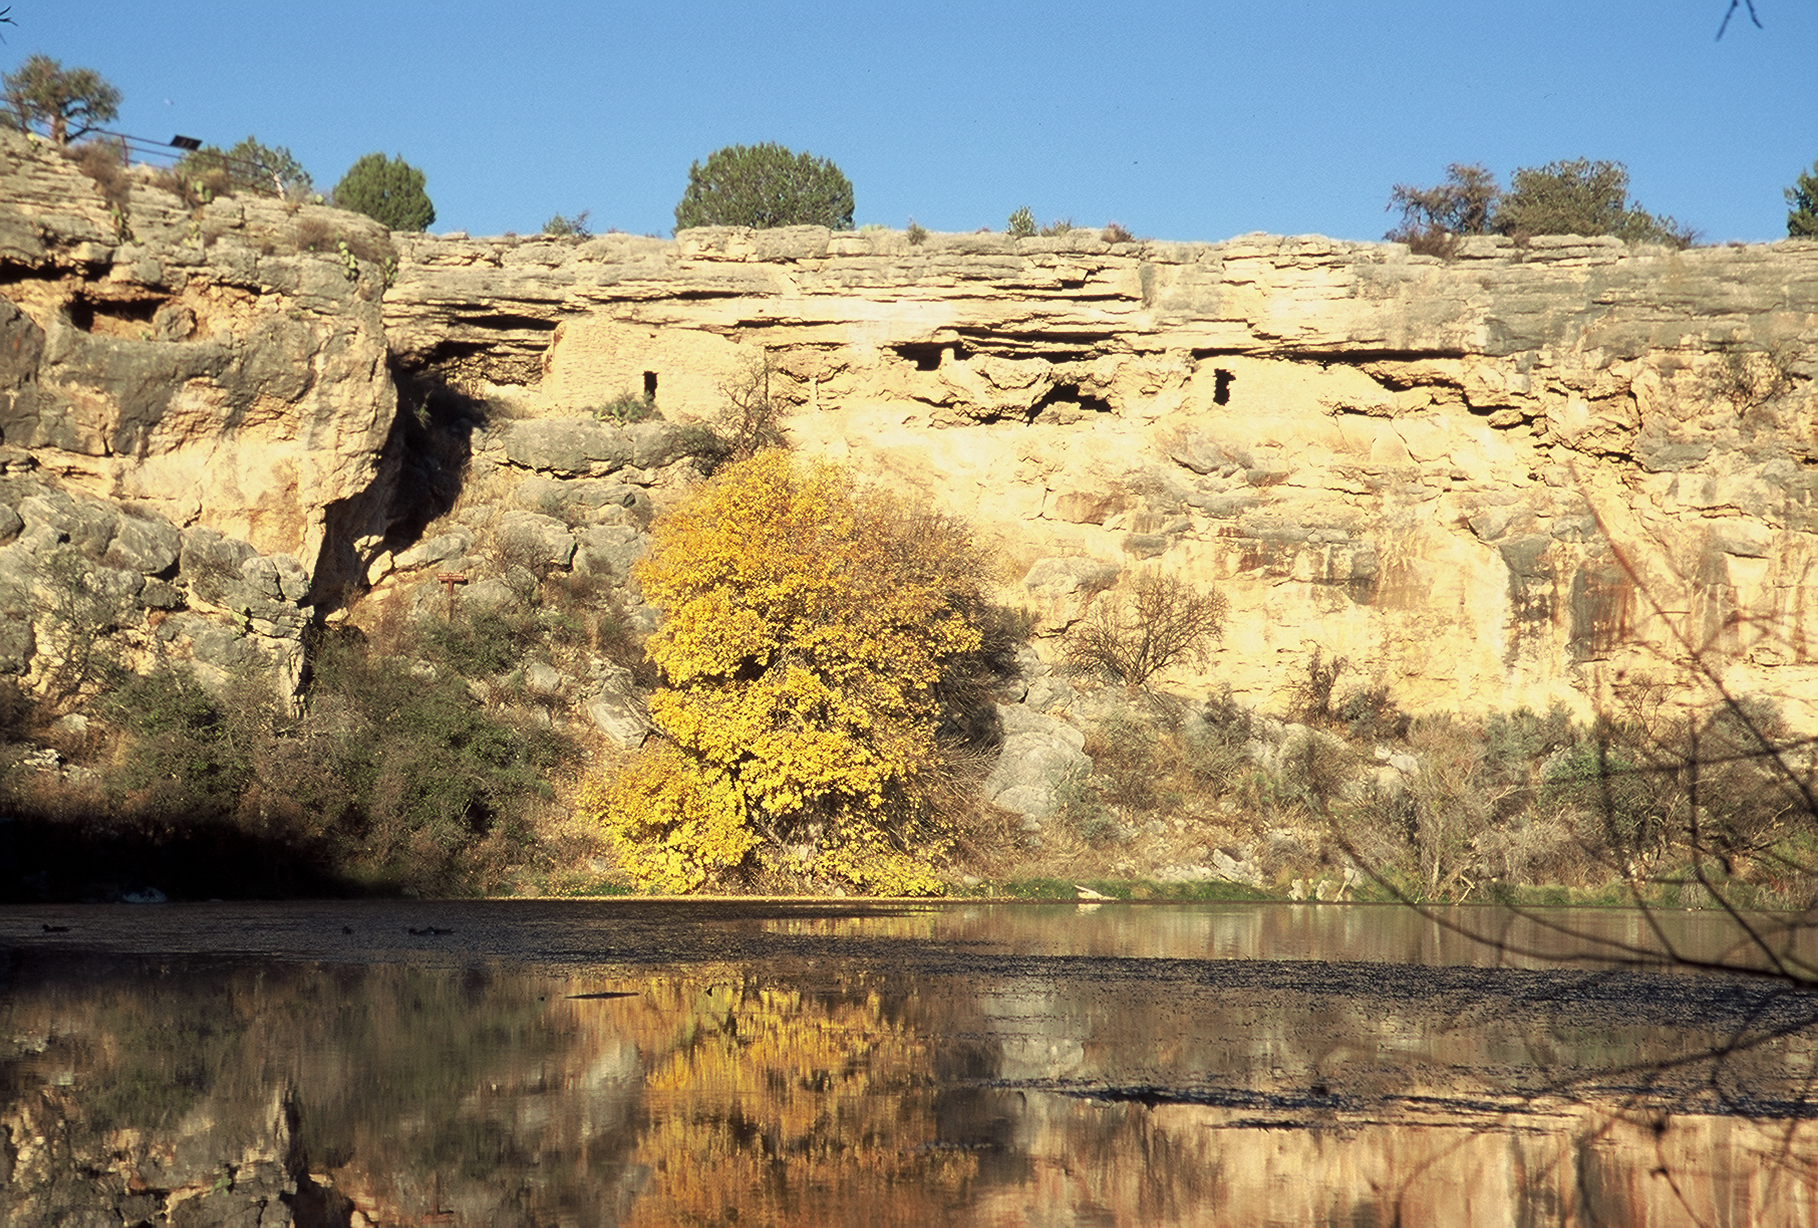 Two cliff dwellings and a tree with yellow leaves above a pond.